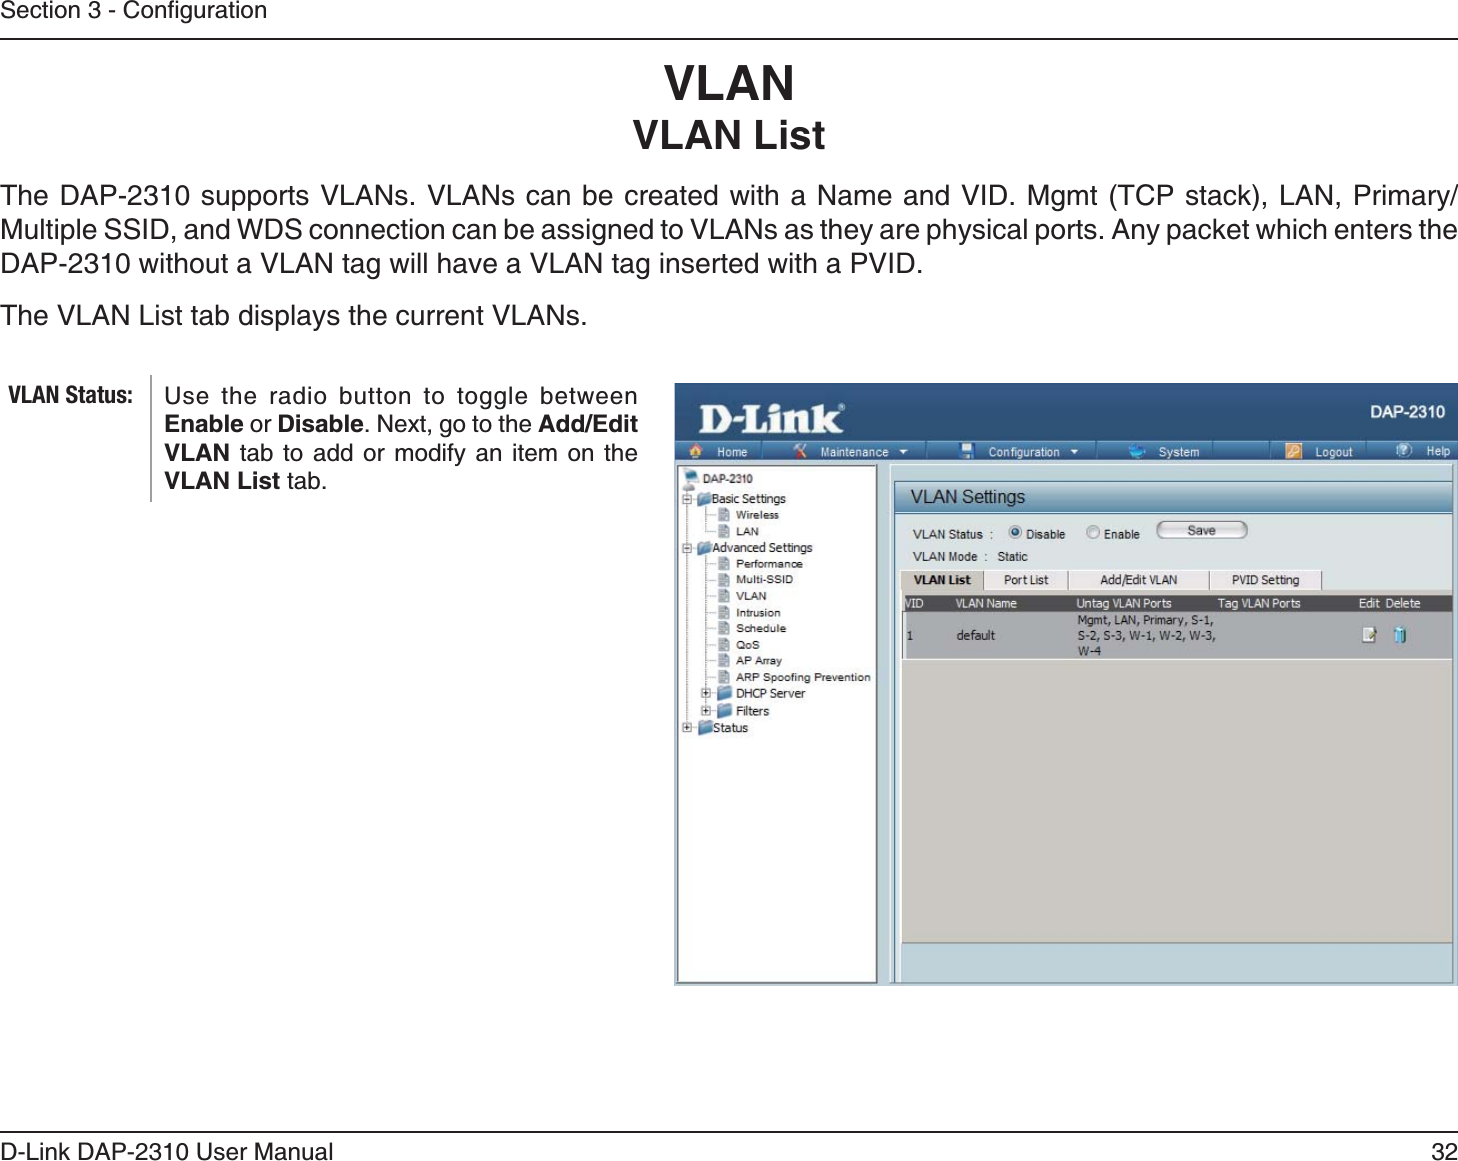 32D-Link DAP-2310 User ManualVLANVLAN ListMultiple SSID, and WDS connection can be assigned to VLANs as they are physical ports. Any packet which enters the DAP-2310 without a VLAN tag will have a VLAN tag inserted with a PVID.The VLAN List tab displays the current VLANs.Use the radio button to toggle between Enable or Disable. Next, go to the Add/Edit VLAN tab to add or modify an item on the VLAN List tab. VLAN Status: